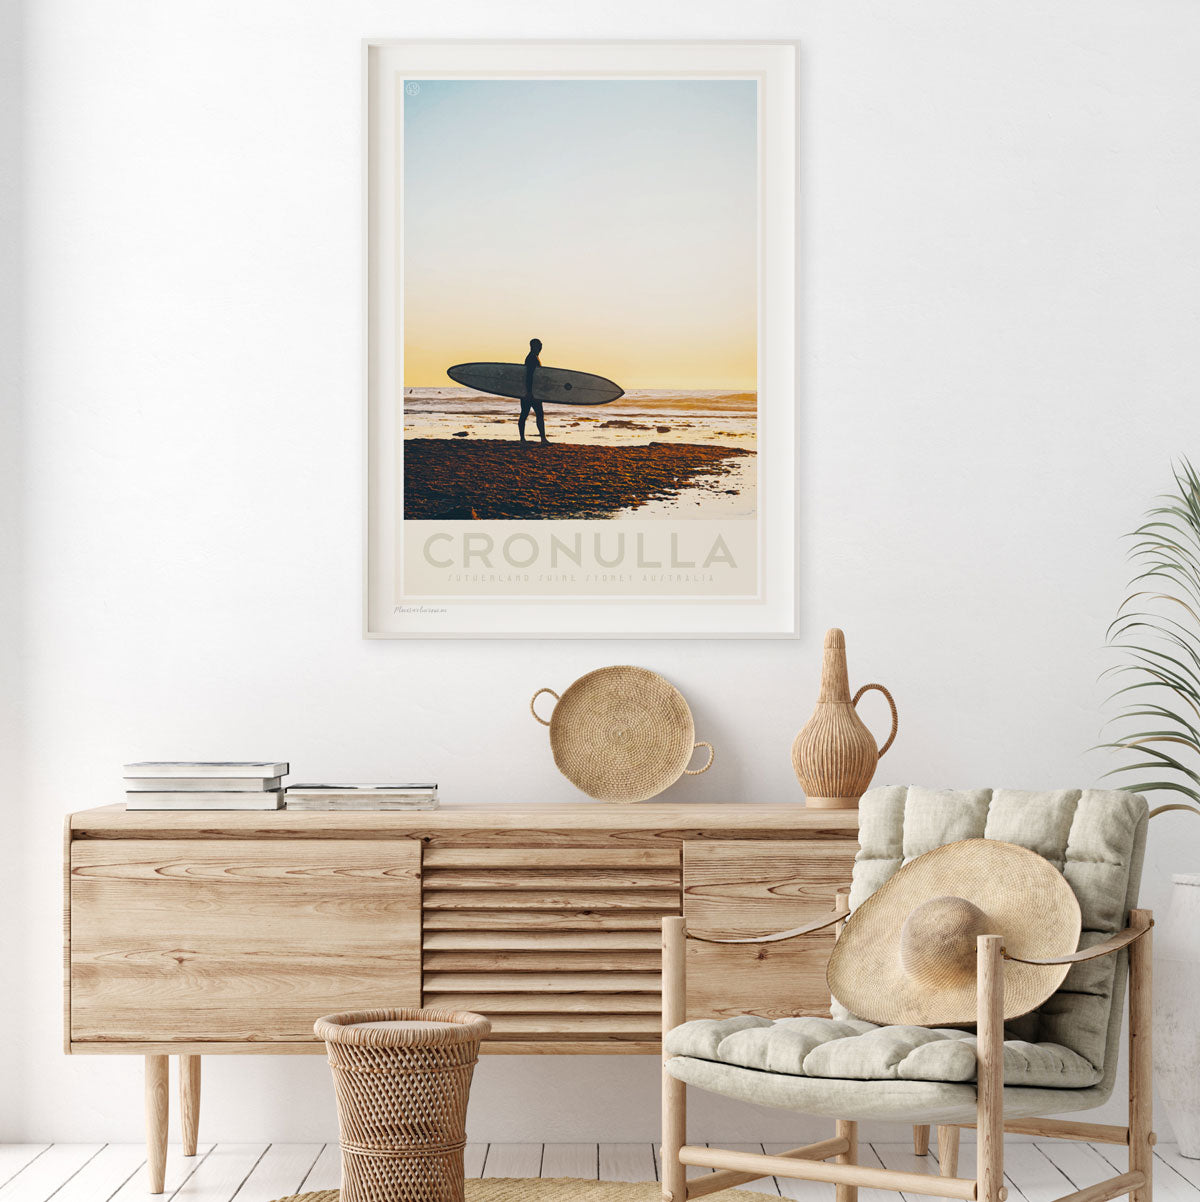 Cronulla beach vintage travel  poster by places we luv